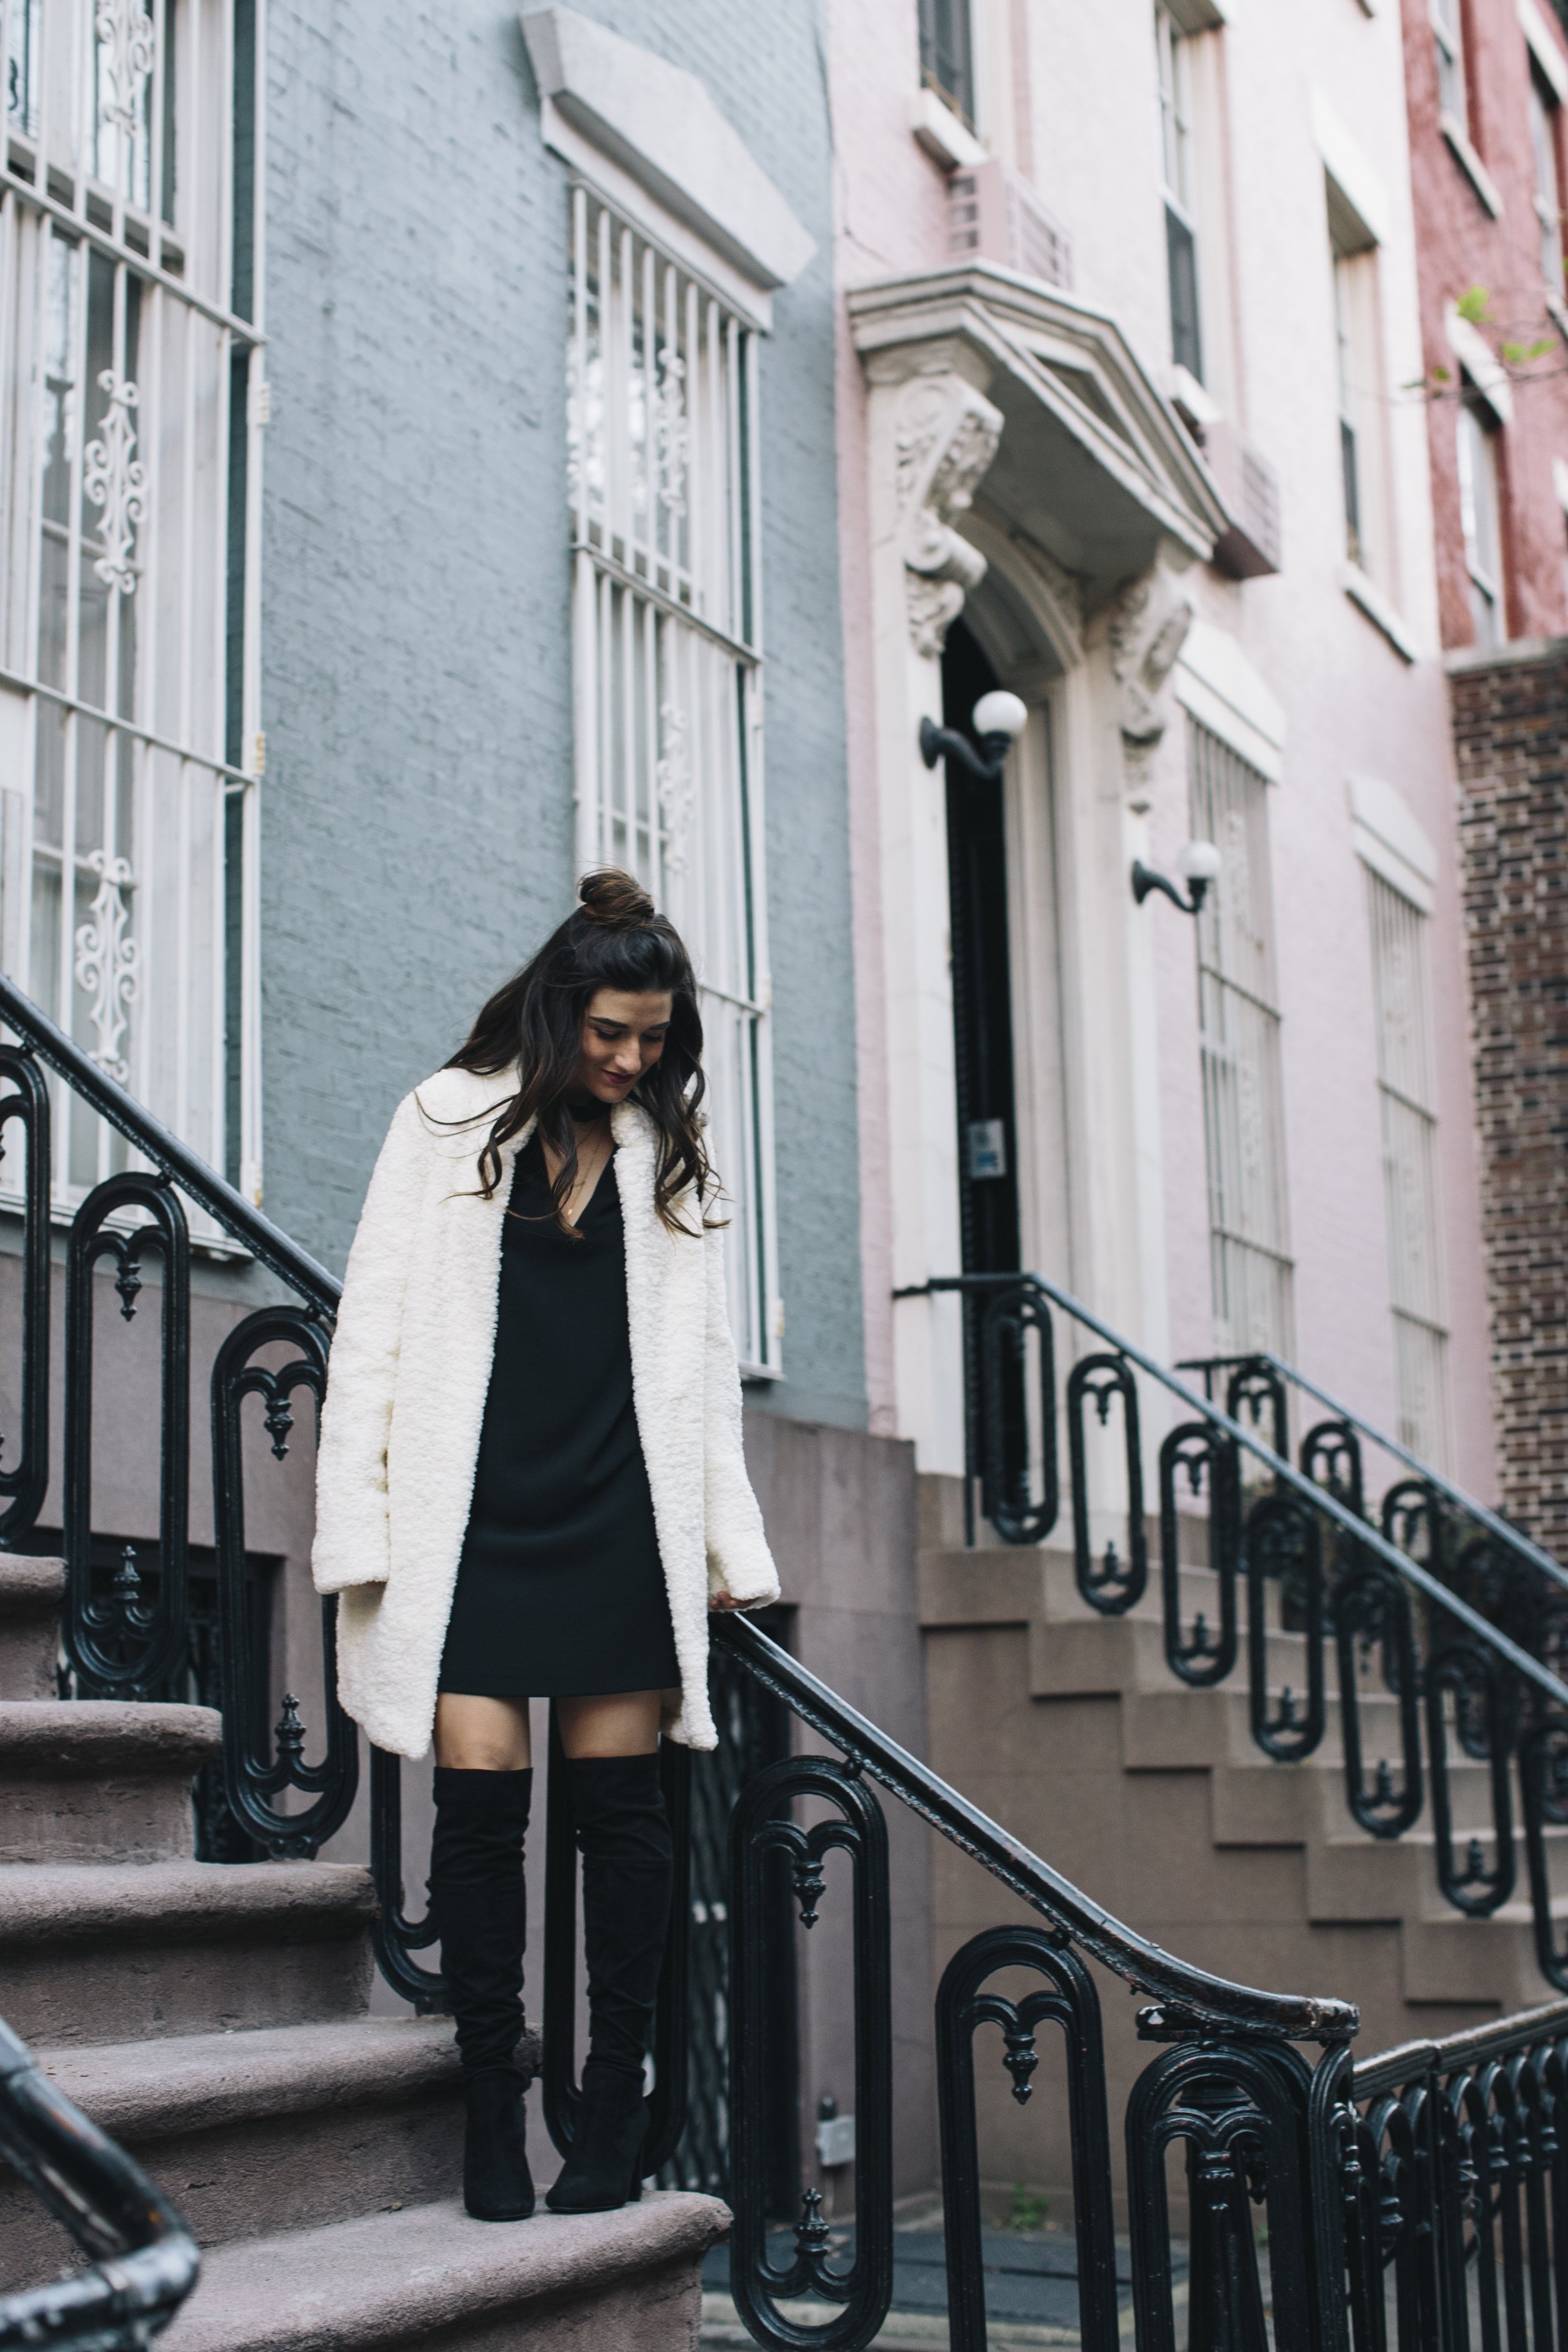 Teddy Bear Coat + OTN Boots How To Avoid Blogger Depression Louboutins & Love Fashion Blog Esther Santer NYC Street Style Blogger Outfit OOTD Trendy Ivanka Trump Nordstrom Bloomingdales Black Dress Zara Pretty Online Shopping Wear Shoes Bun Girl Women.jpg